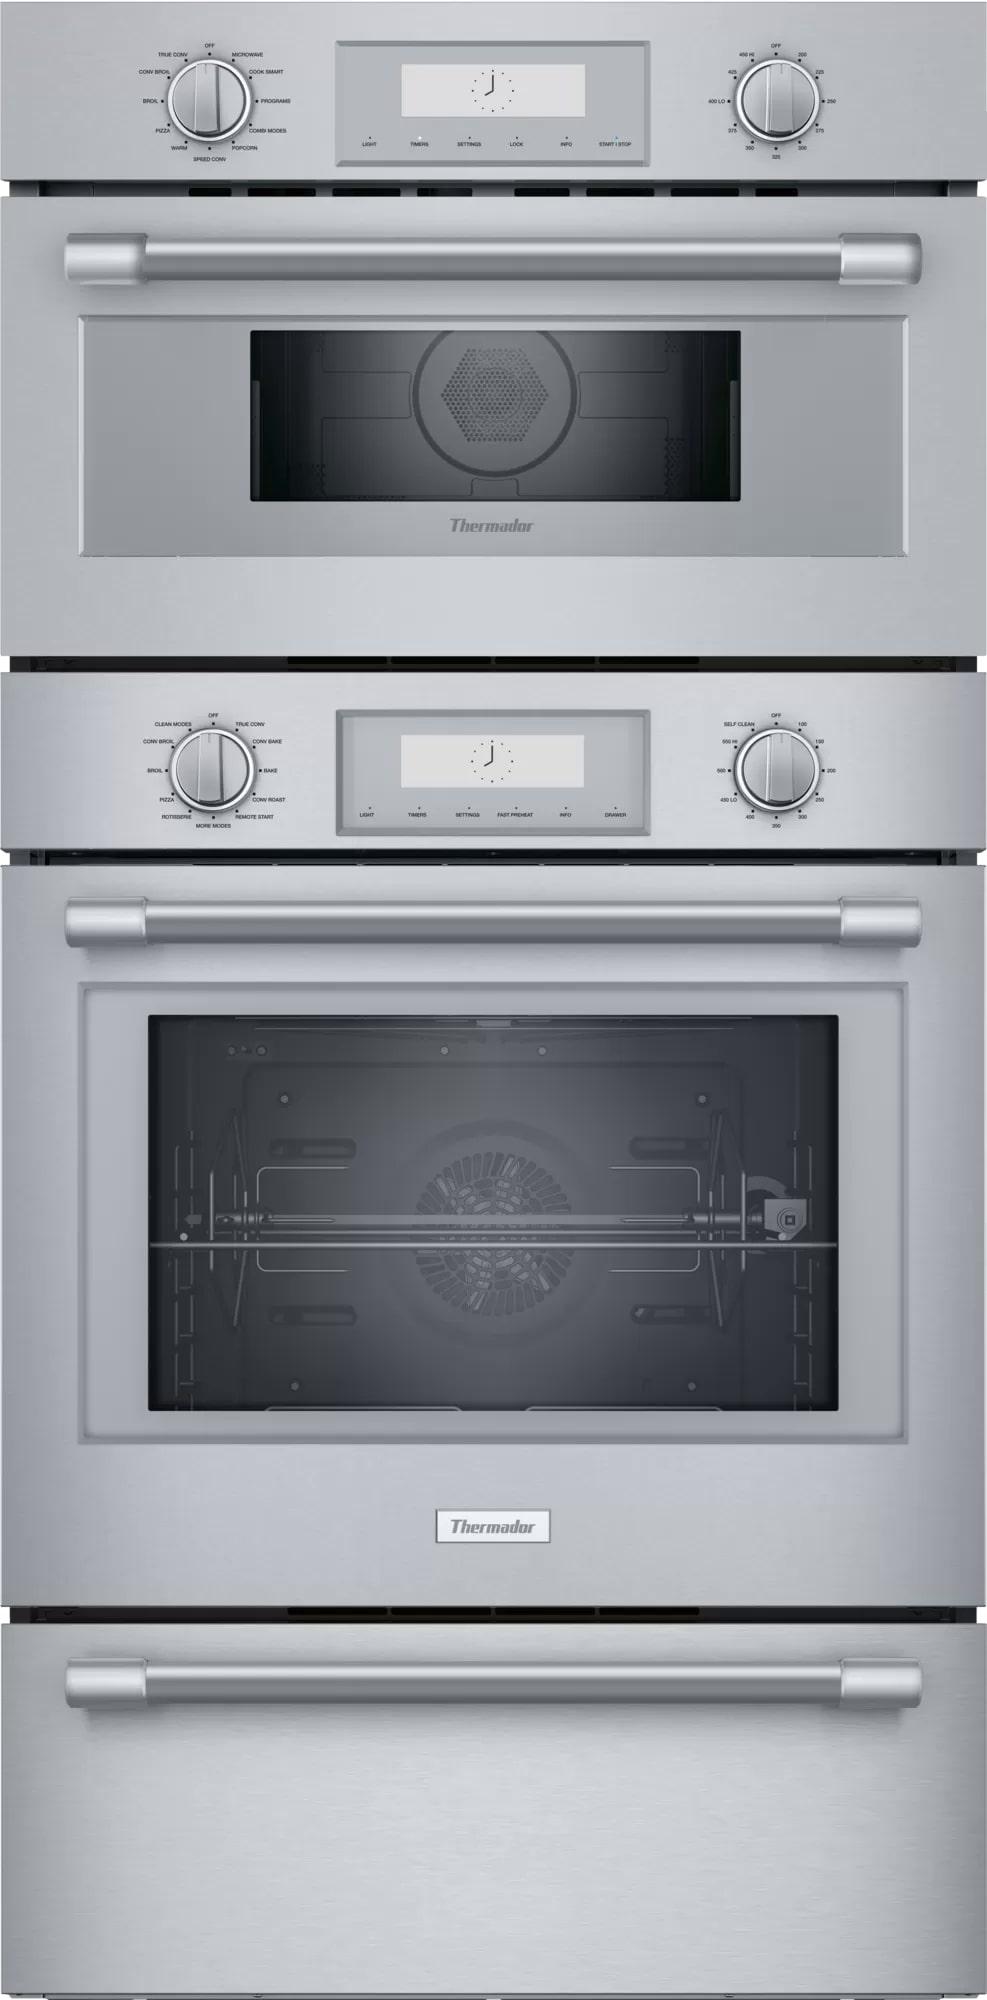 Thermador - 8.6 cu. ft Combination Oven in Stainless - PODMCW31W